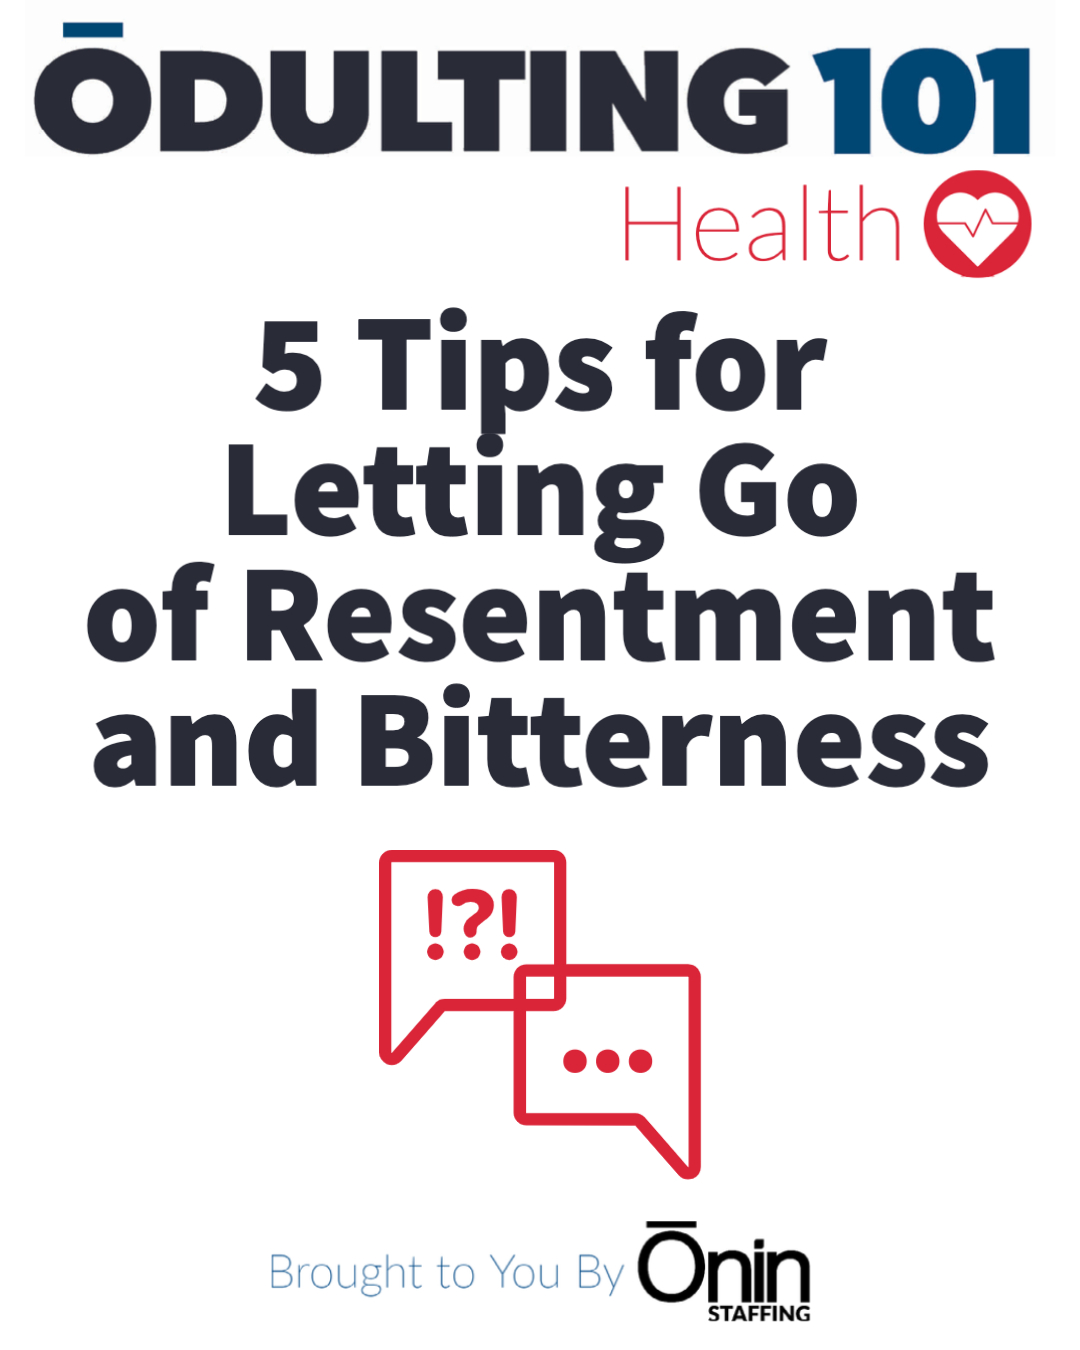 White background with bold black title "5 Tips for Letting Go of Resentment and Bitterness" and red text-app speech bubbles with random punctuation and an ellipsis.